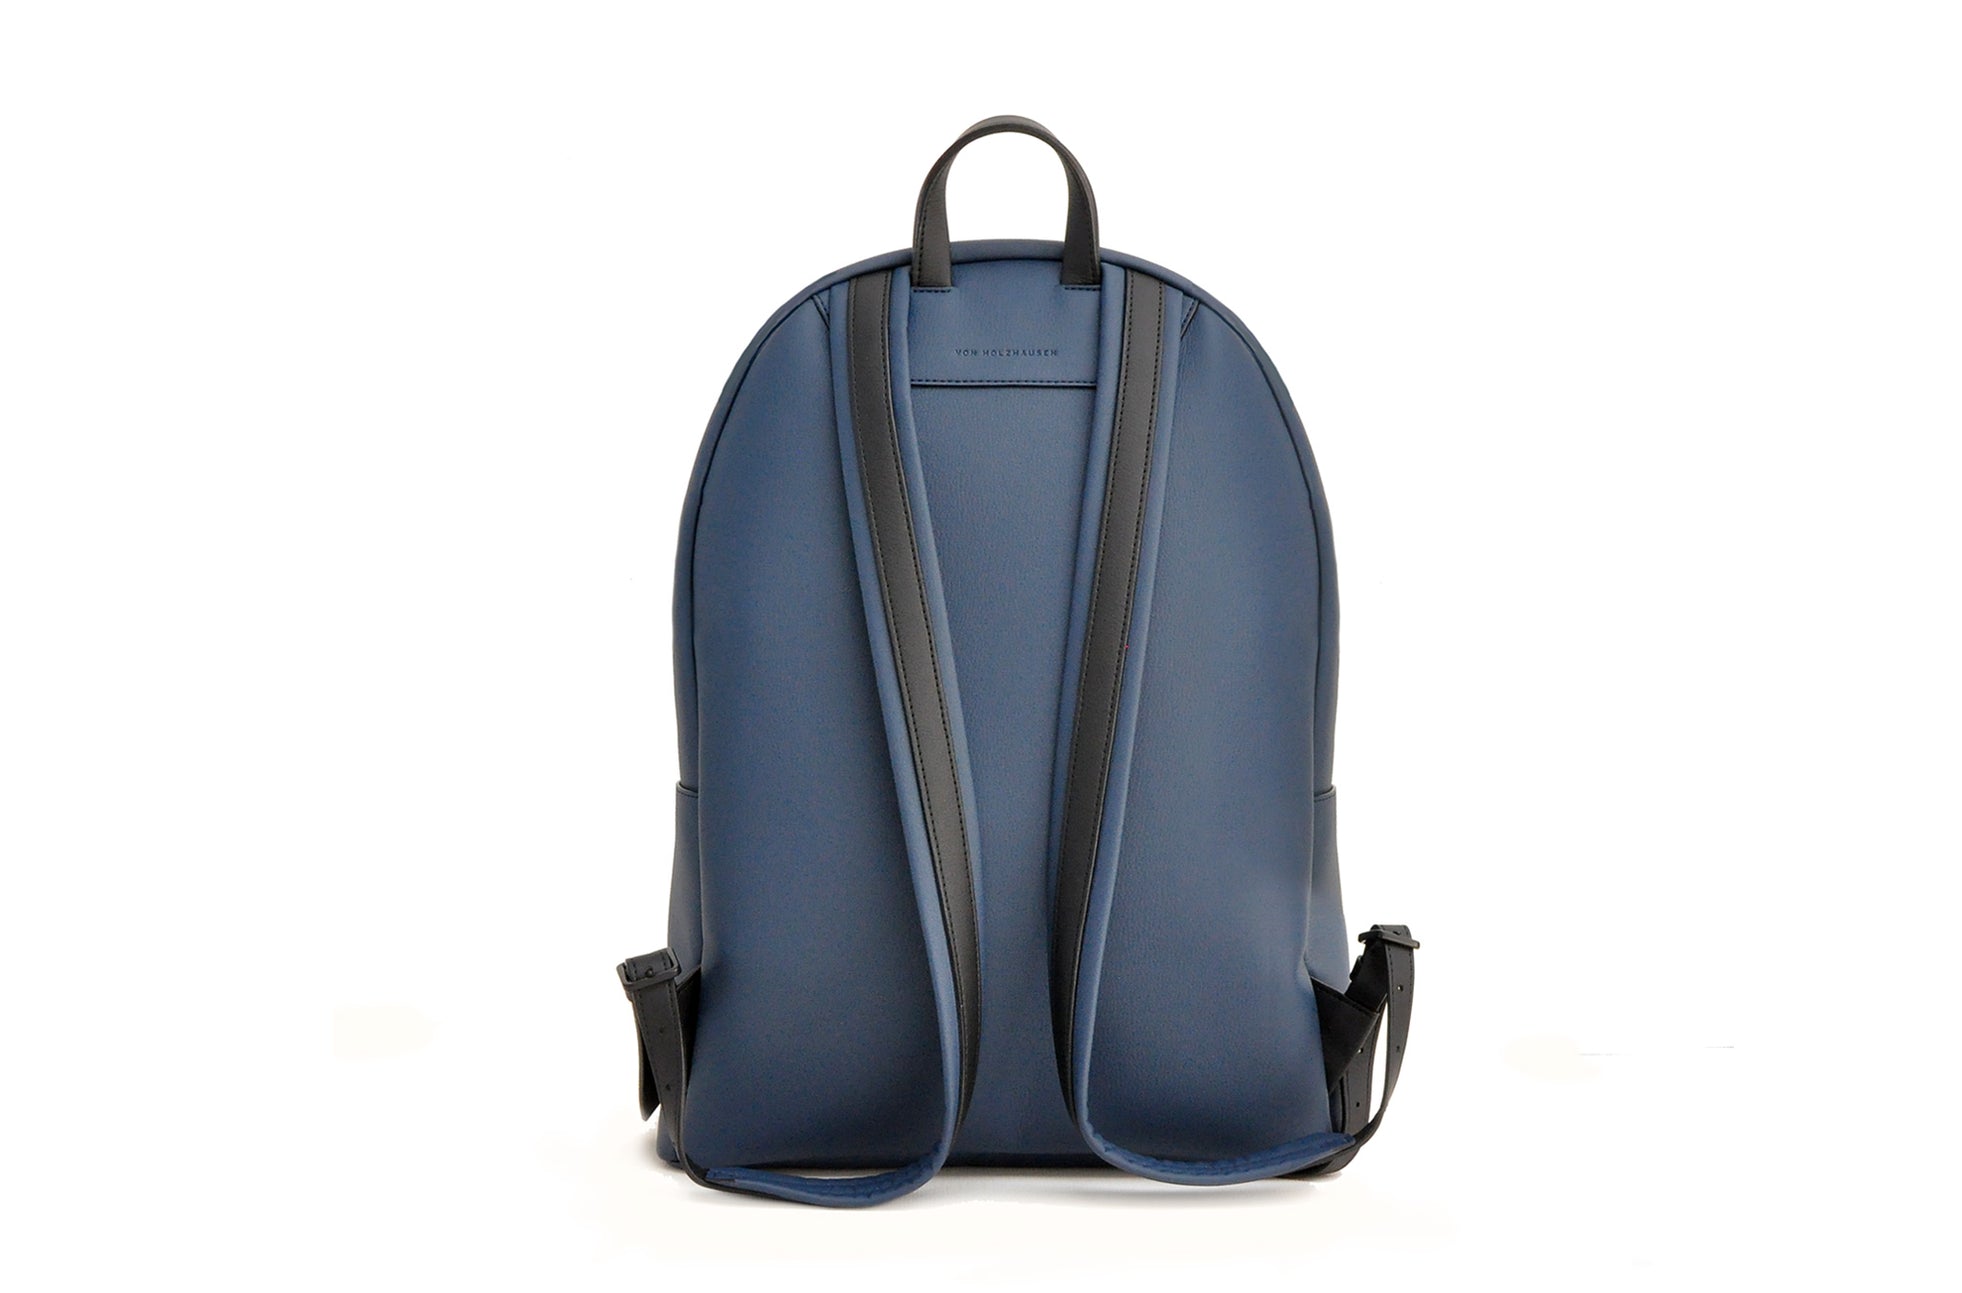 The Classic Backpack in Technik in Denim and Black image 4